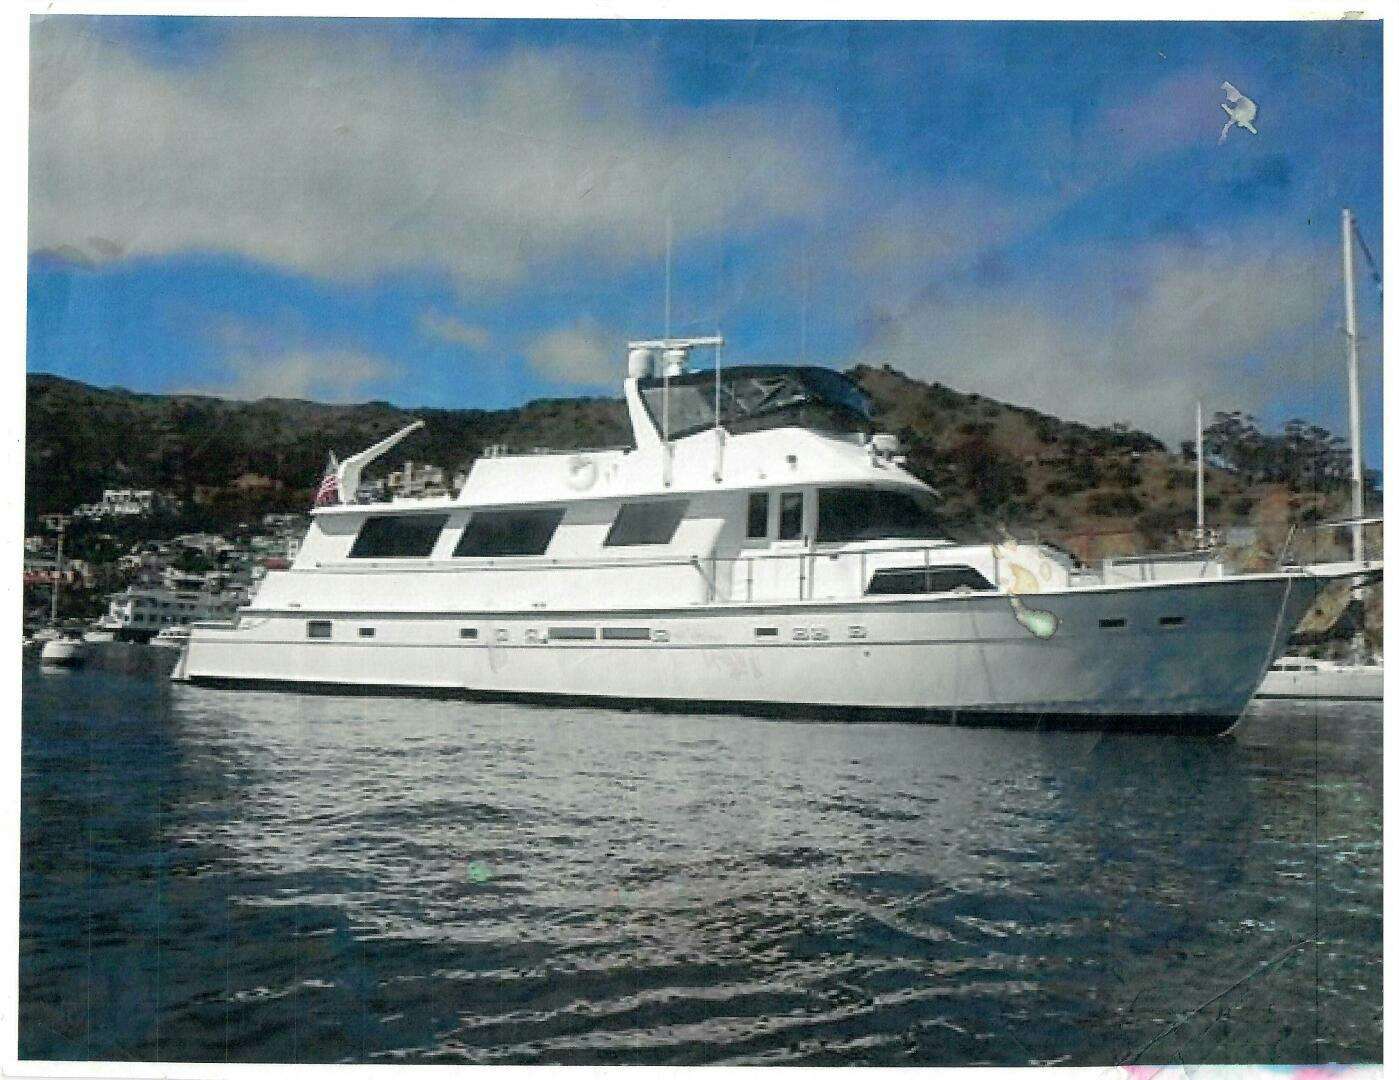 Lady t
Yacht for Sale